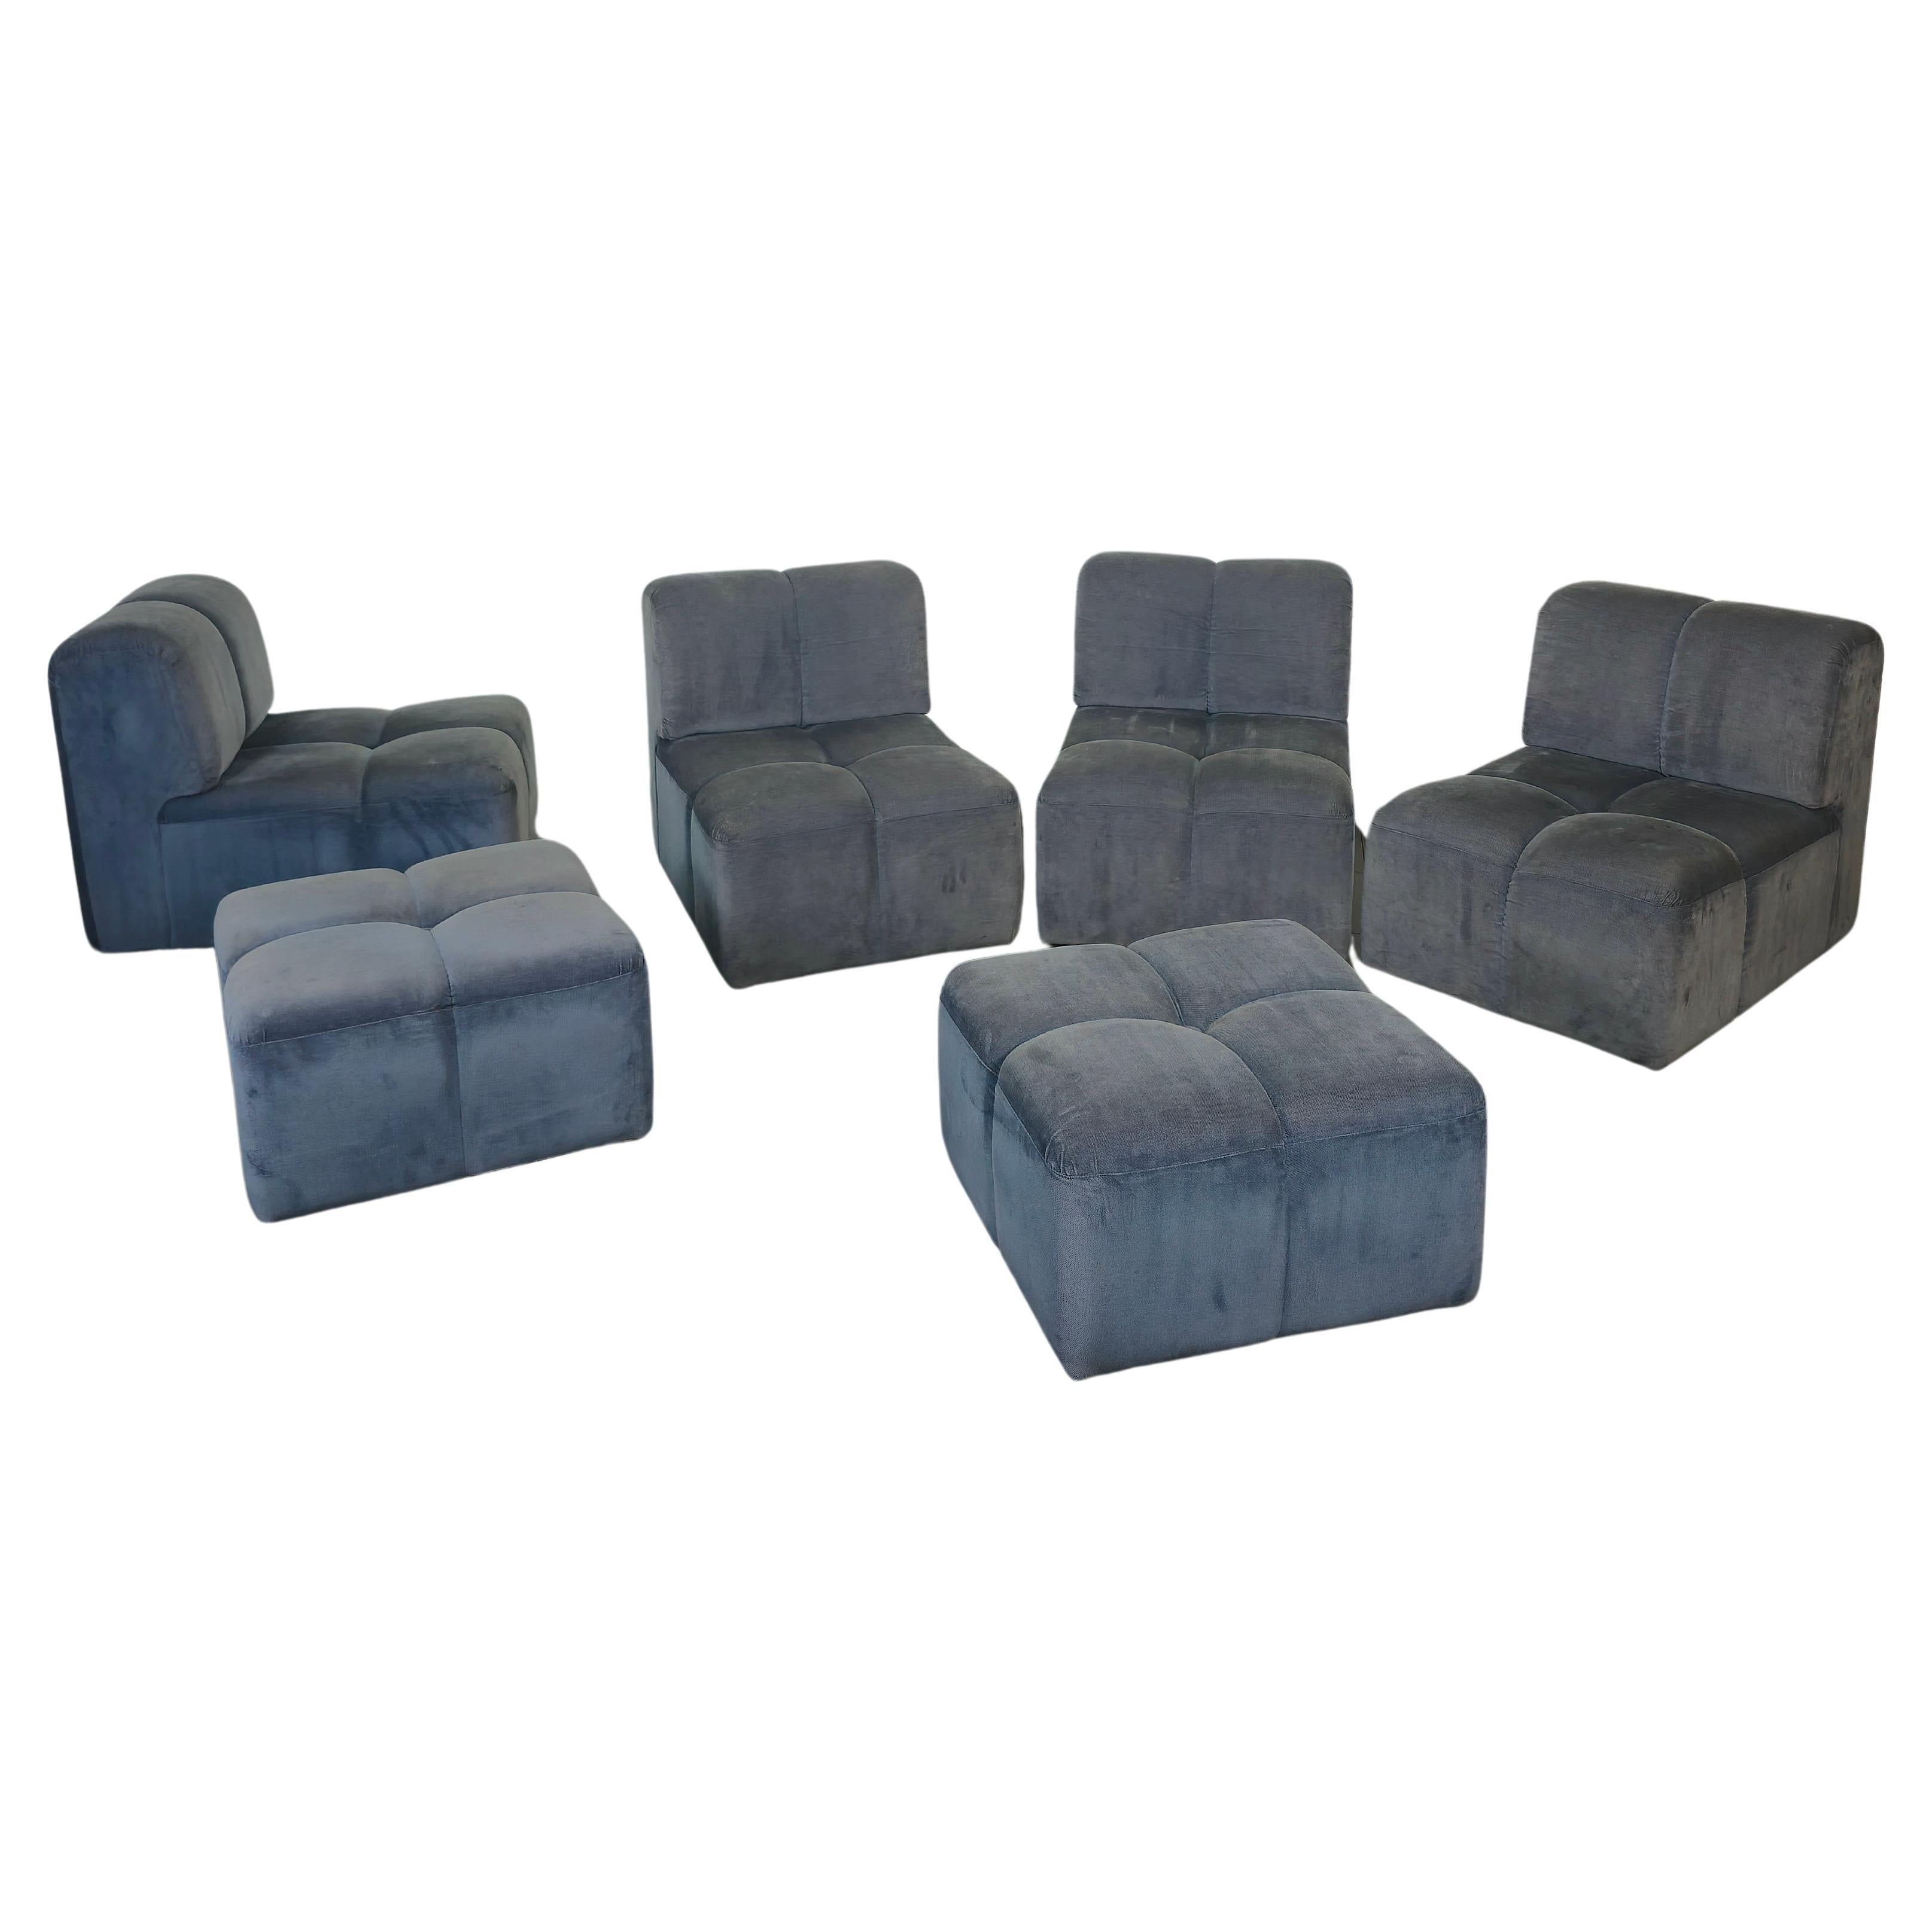 Modular set made of smooth velvet in shades of sugar paper color, composed of 4 small sofas and 2 square-shaped poufs. Made in Italy in the 70s.



Note: We try to offer our customers an excellent service even in shipments all over the world,